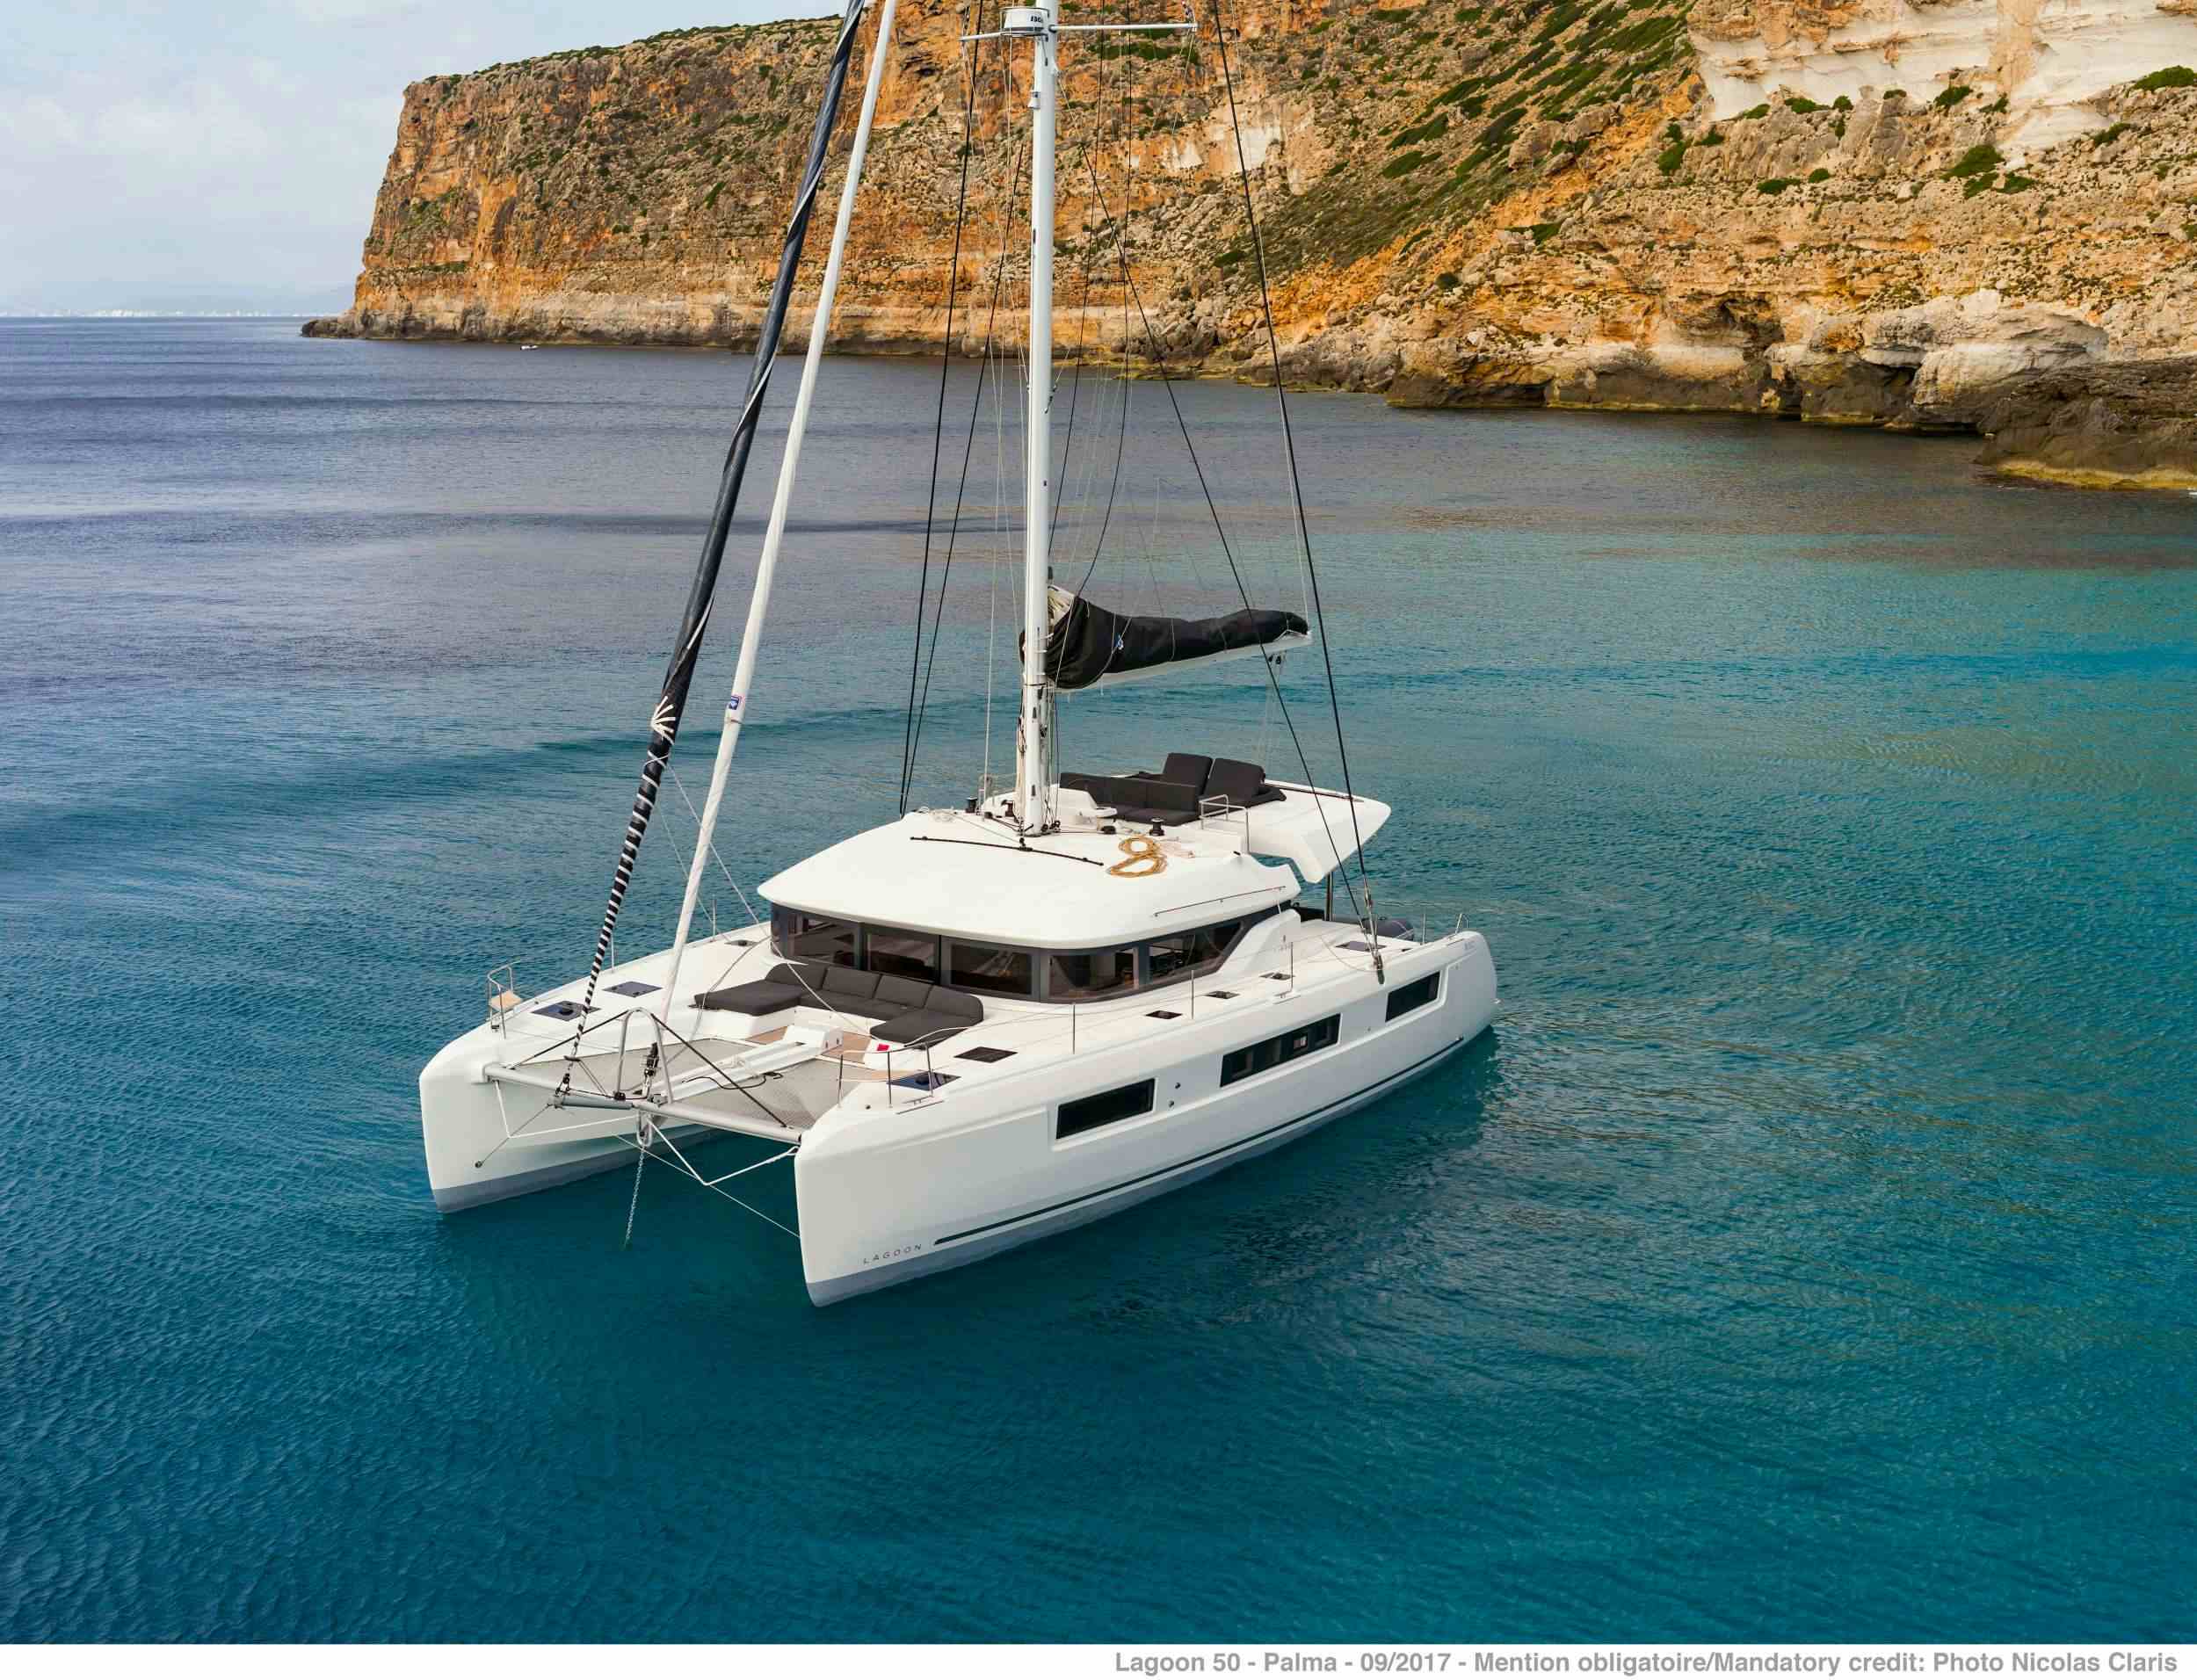 ONEIDA 2 - Yacht Charter Athens & Boat hire in Greece 1